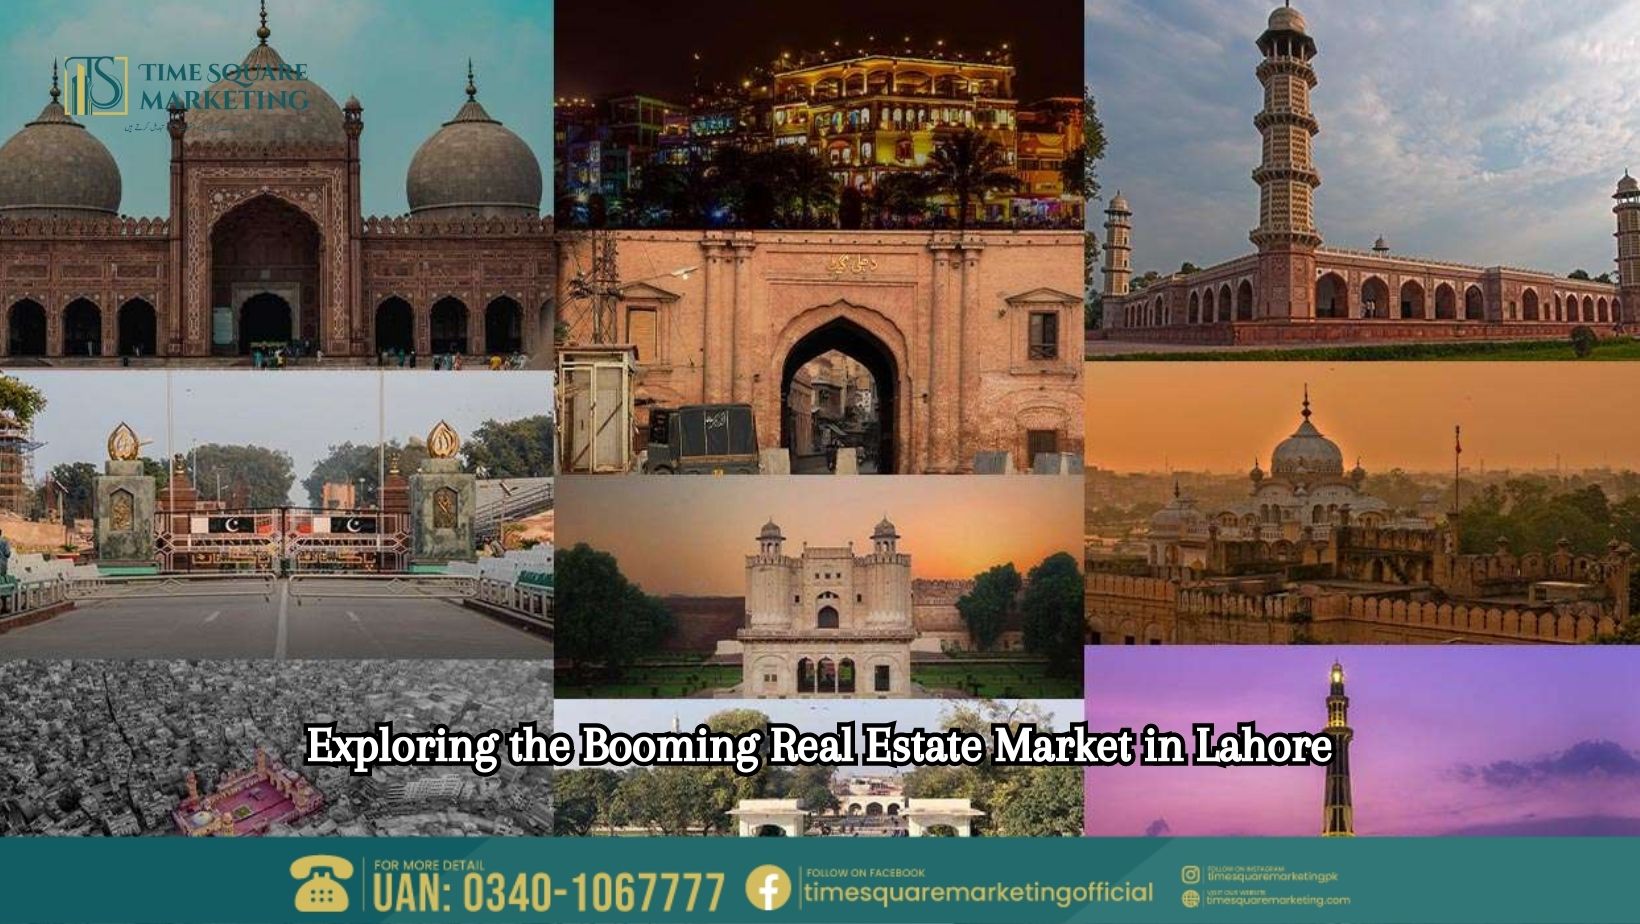 Exploring the Booming Real Estate Market in Lahore